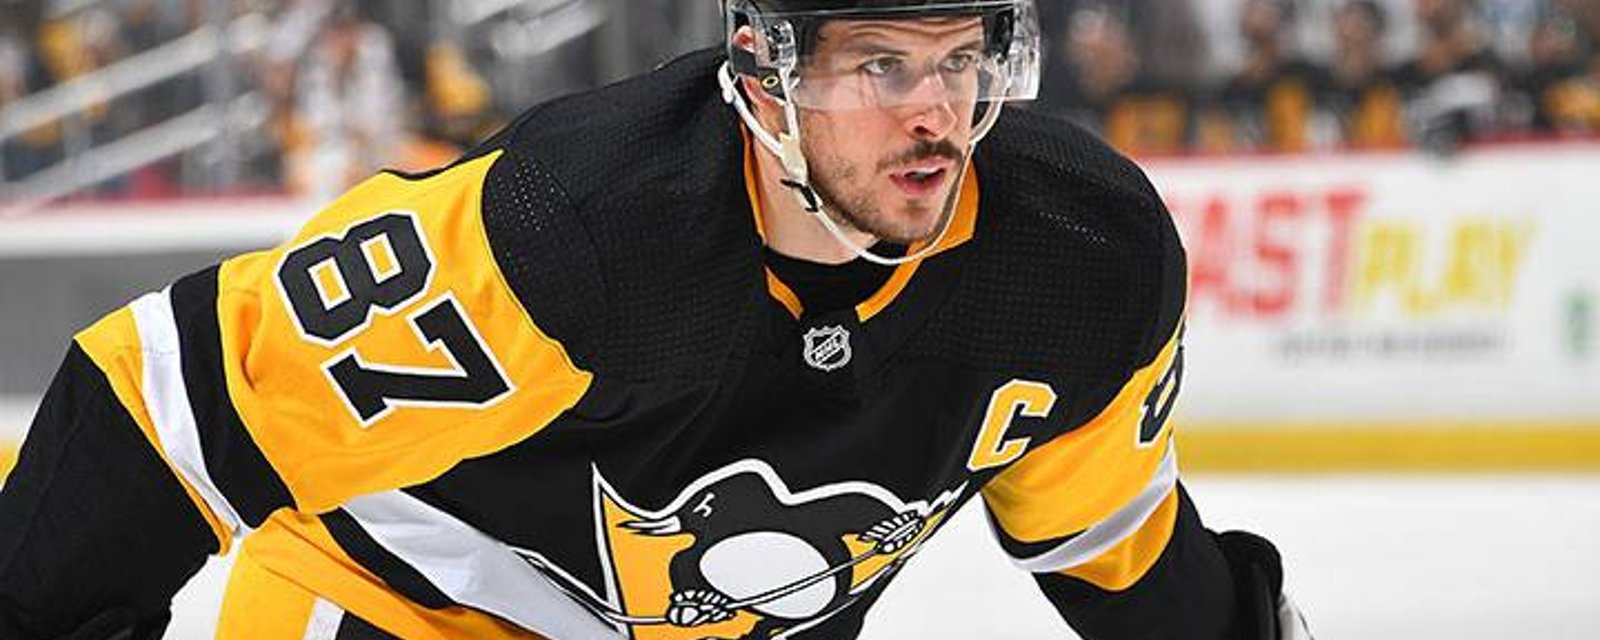 Breaking: Crosby confirms he will return tonight! 